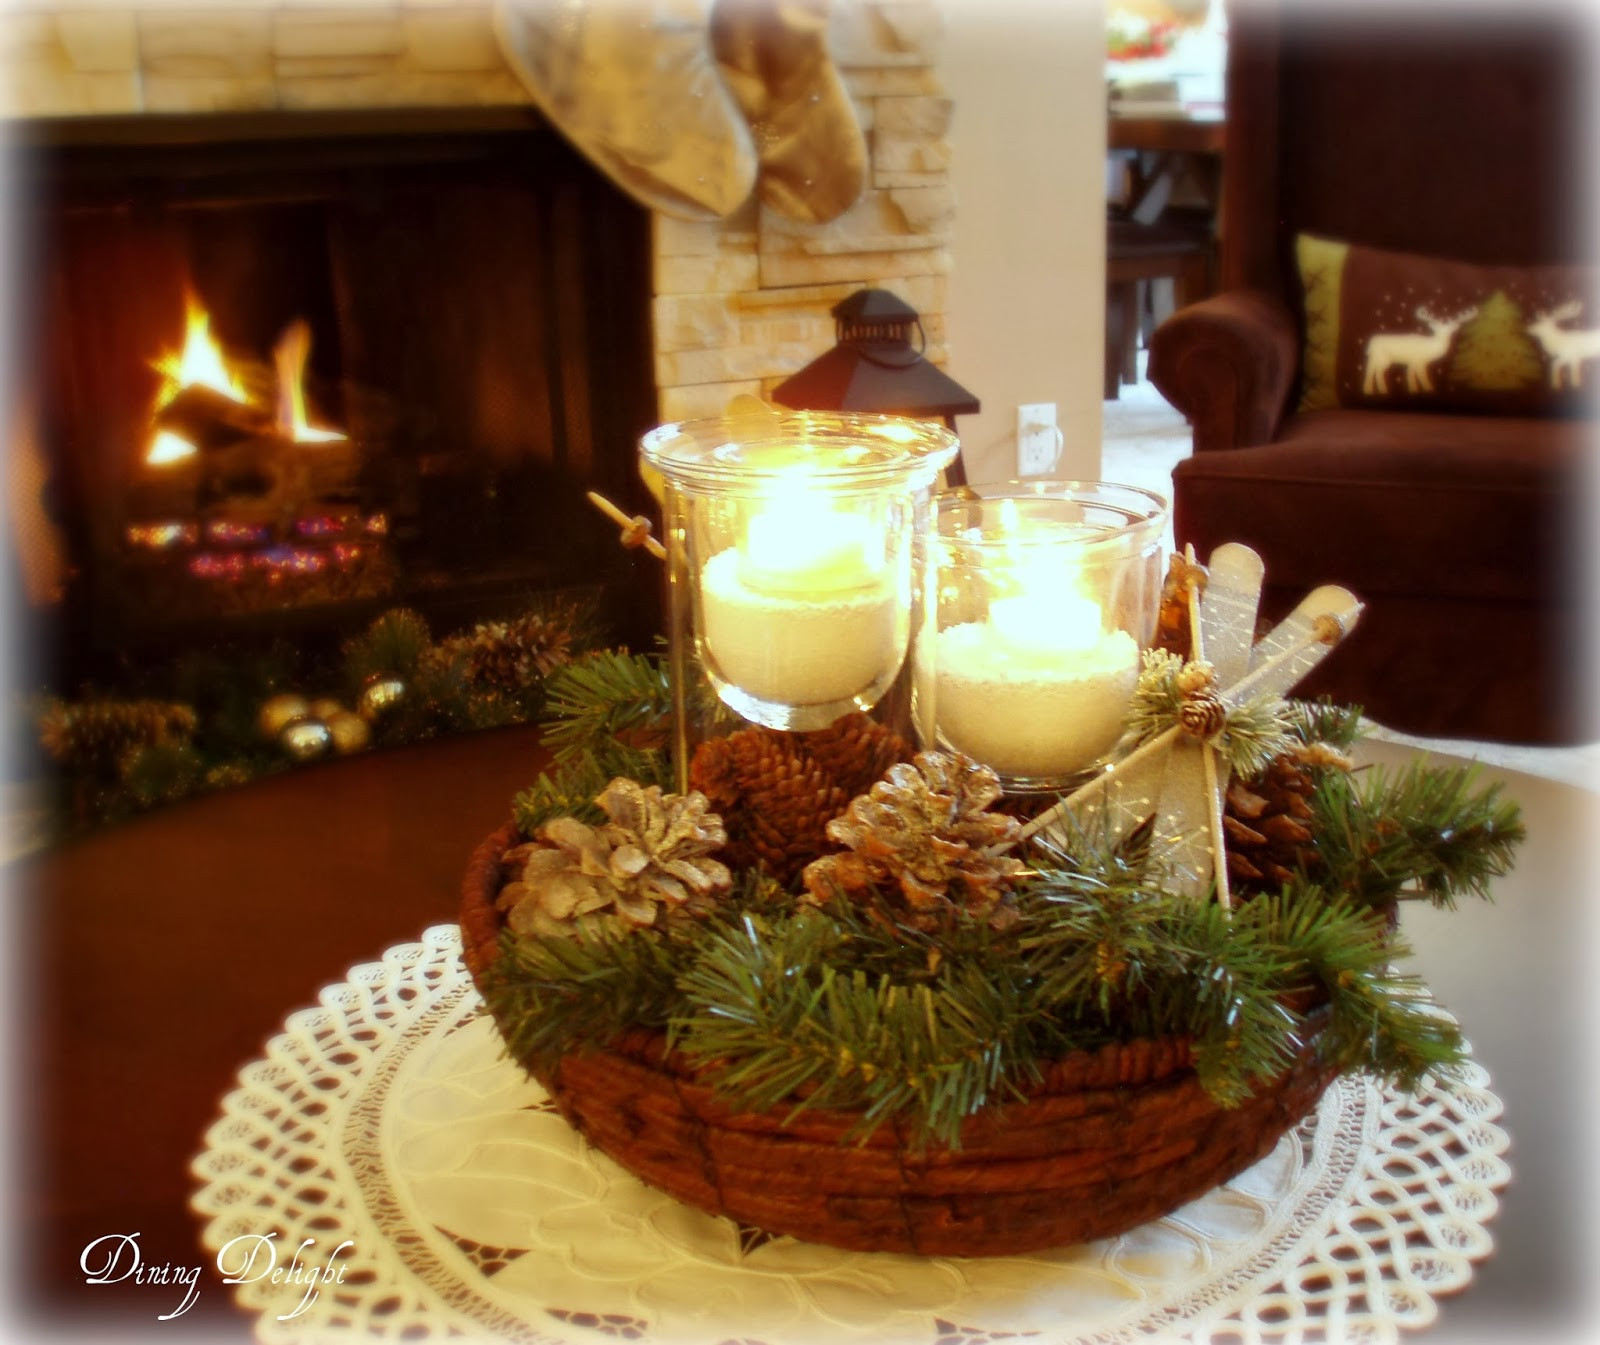 Best ideas about Coffee Table Centerpiece
. Save or Pin Dining Delight Christmas Home Tour 2013 Now.